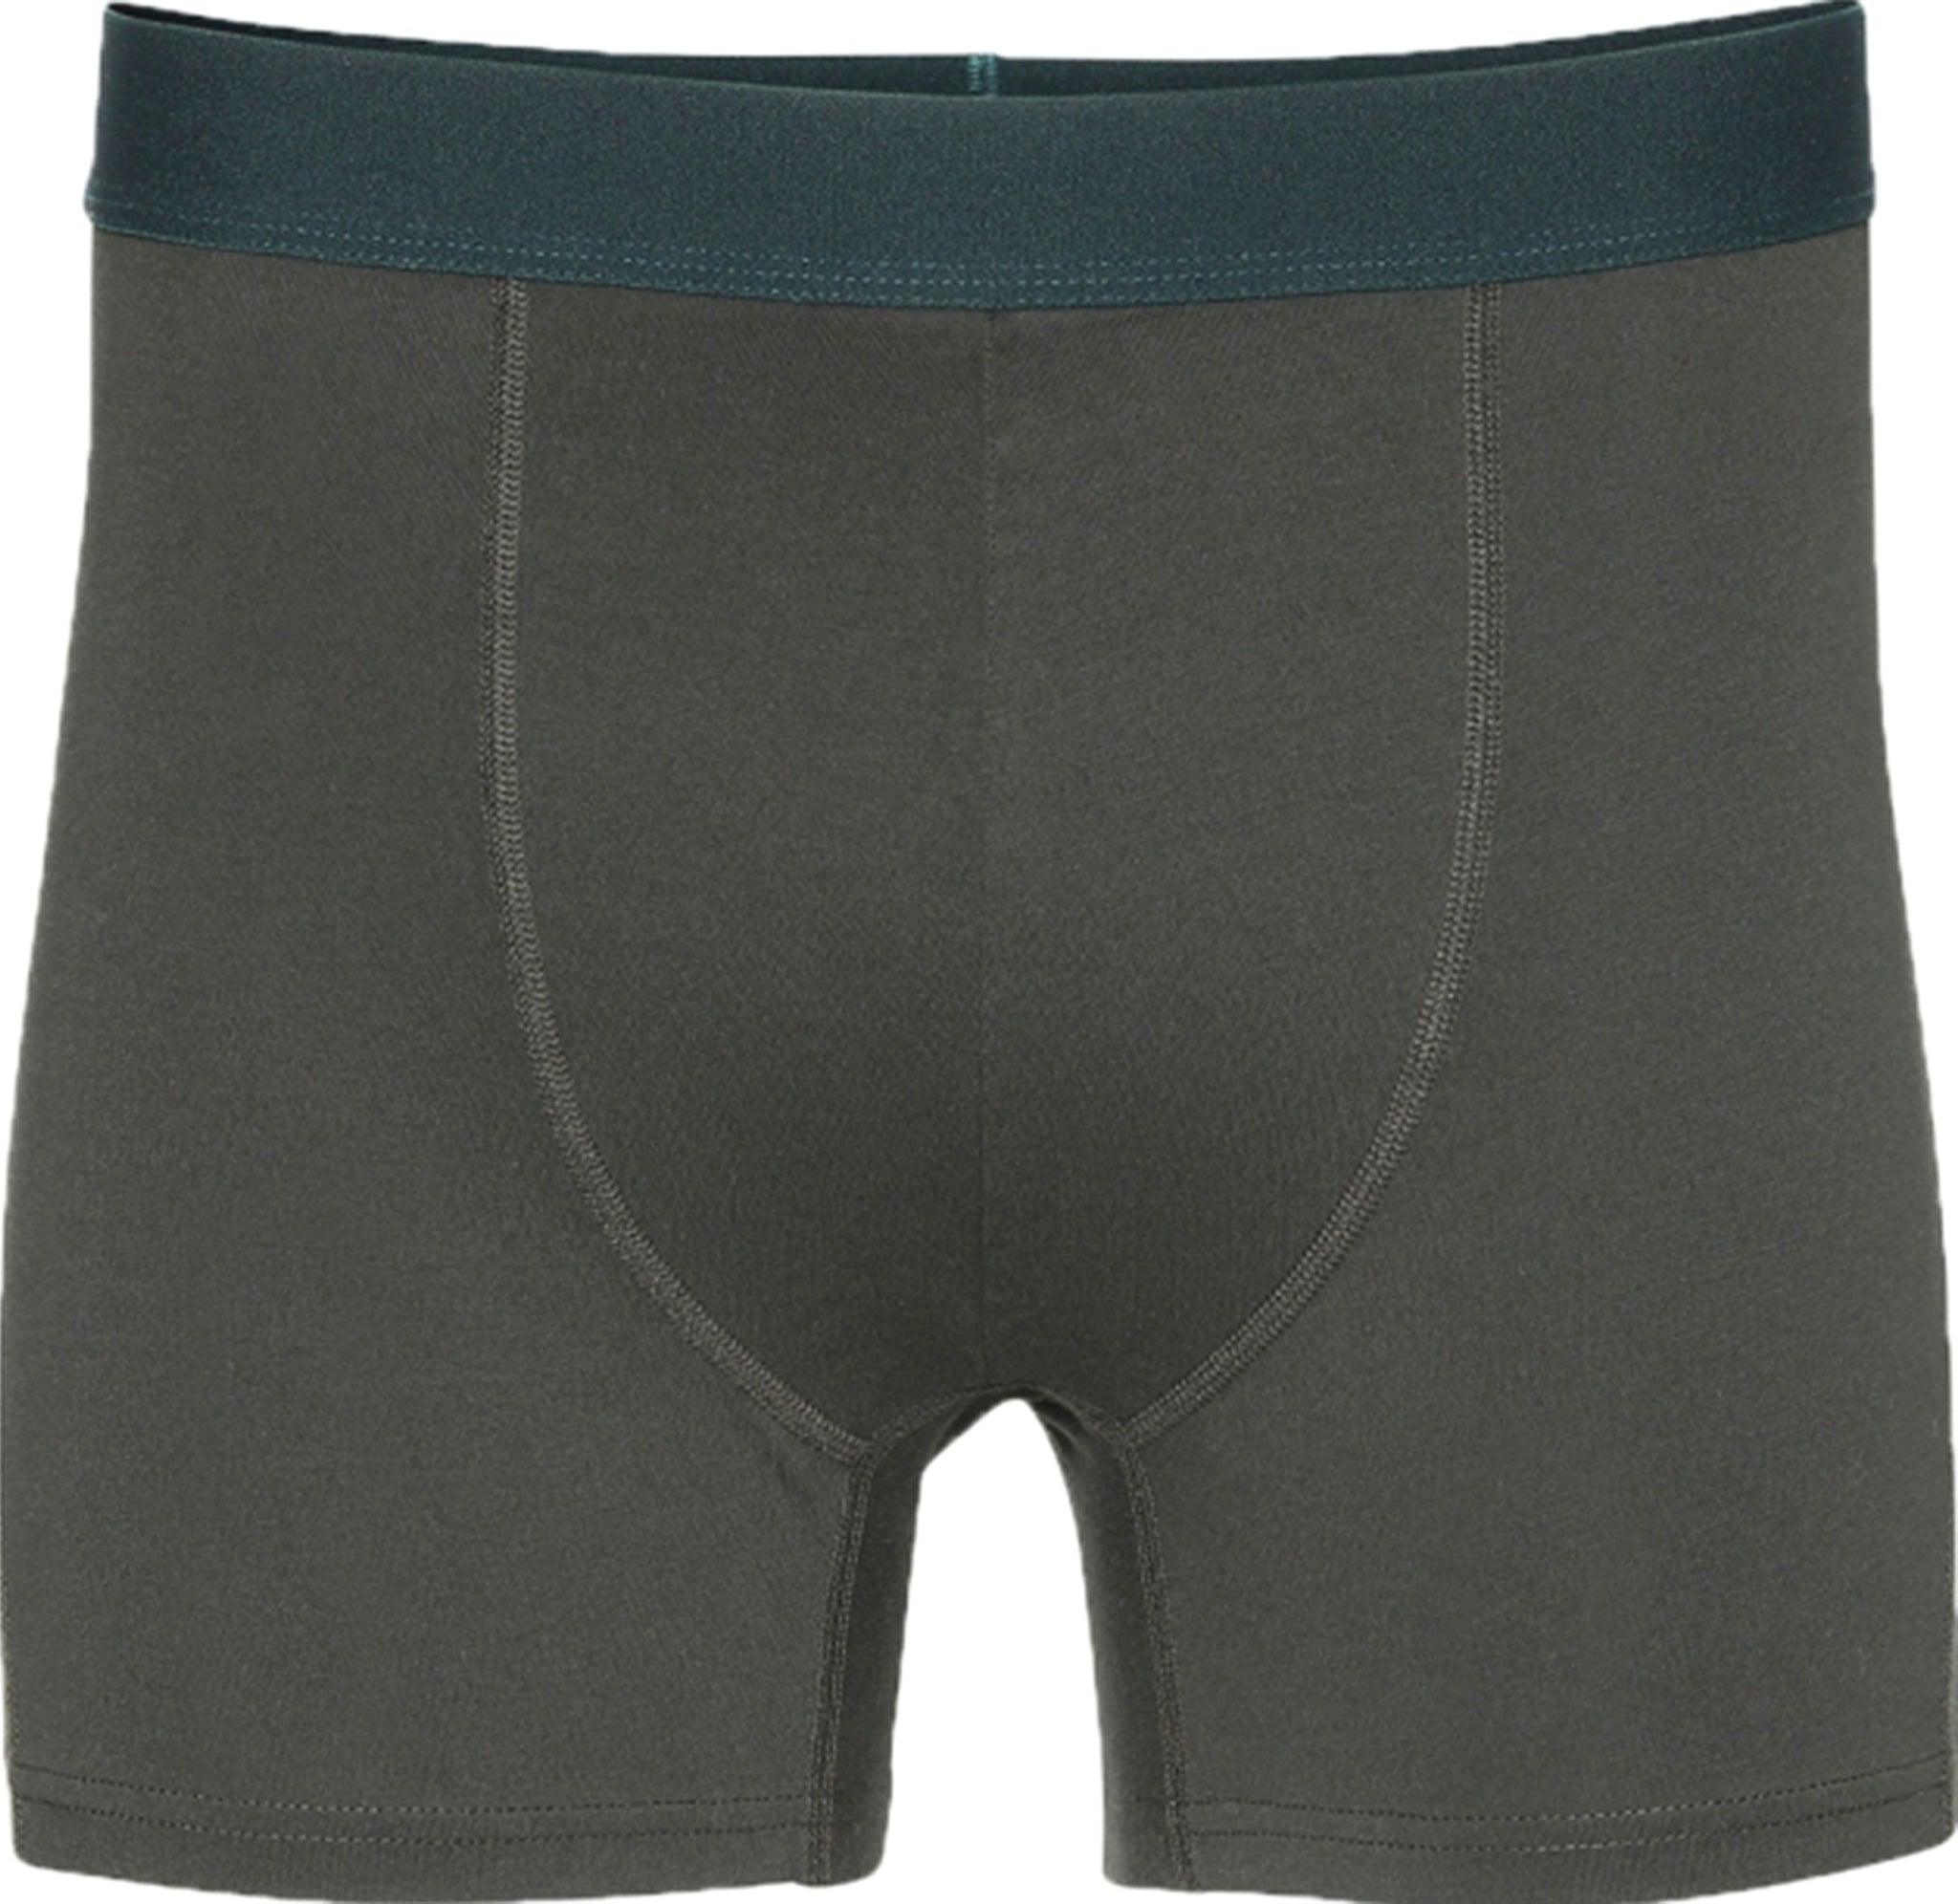 Is UniQlo Airism underwear good? Review after 3 years of use 